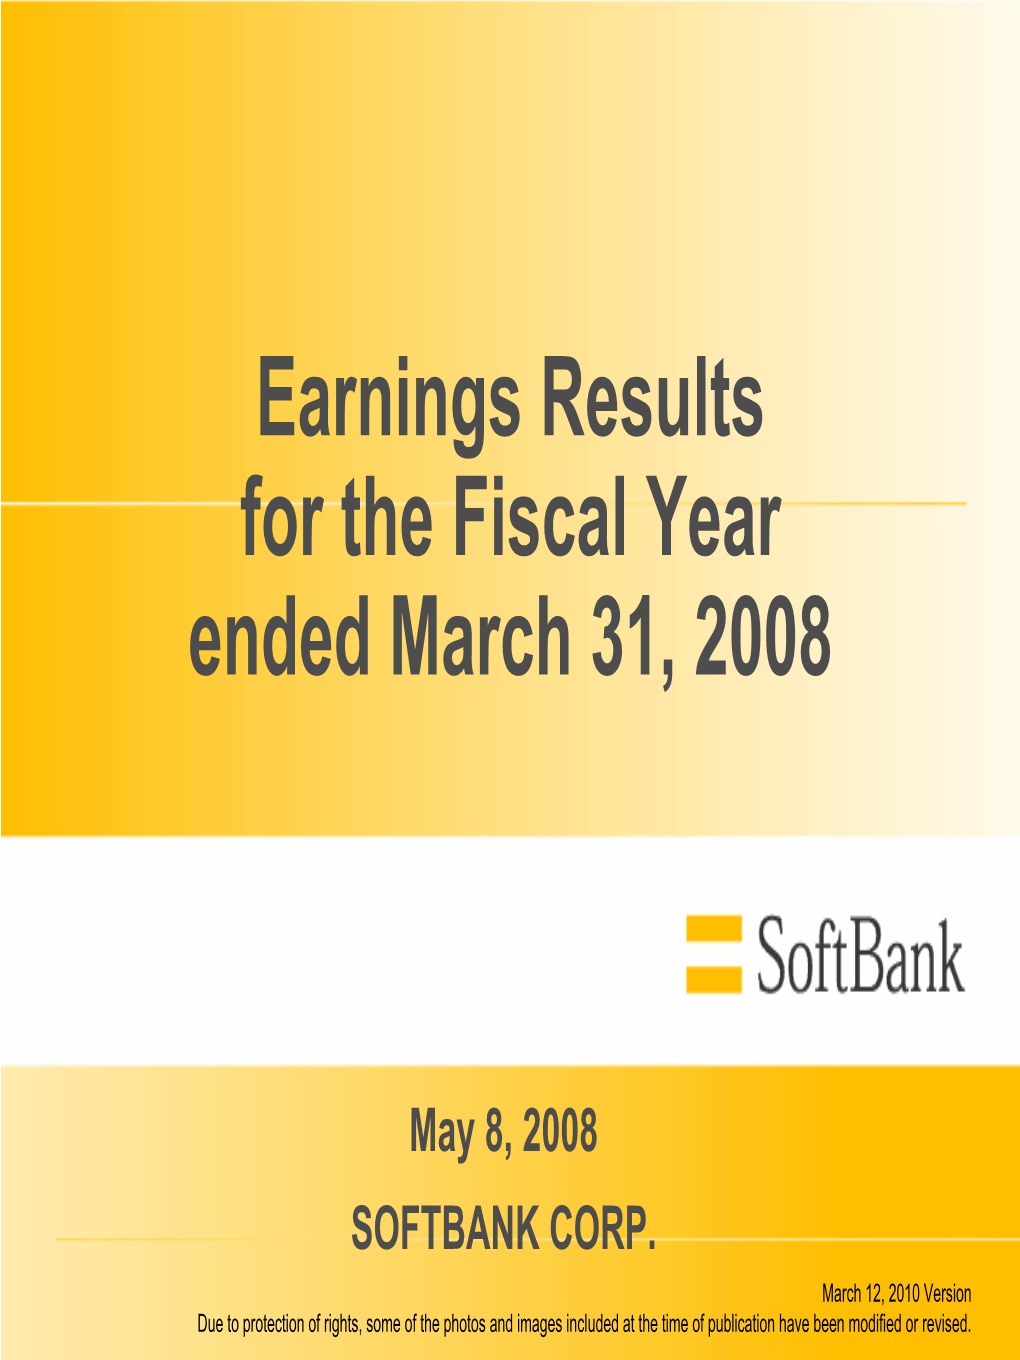 Earnings Results for the Fiscal Year Ended March 31, 2008